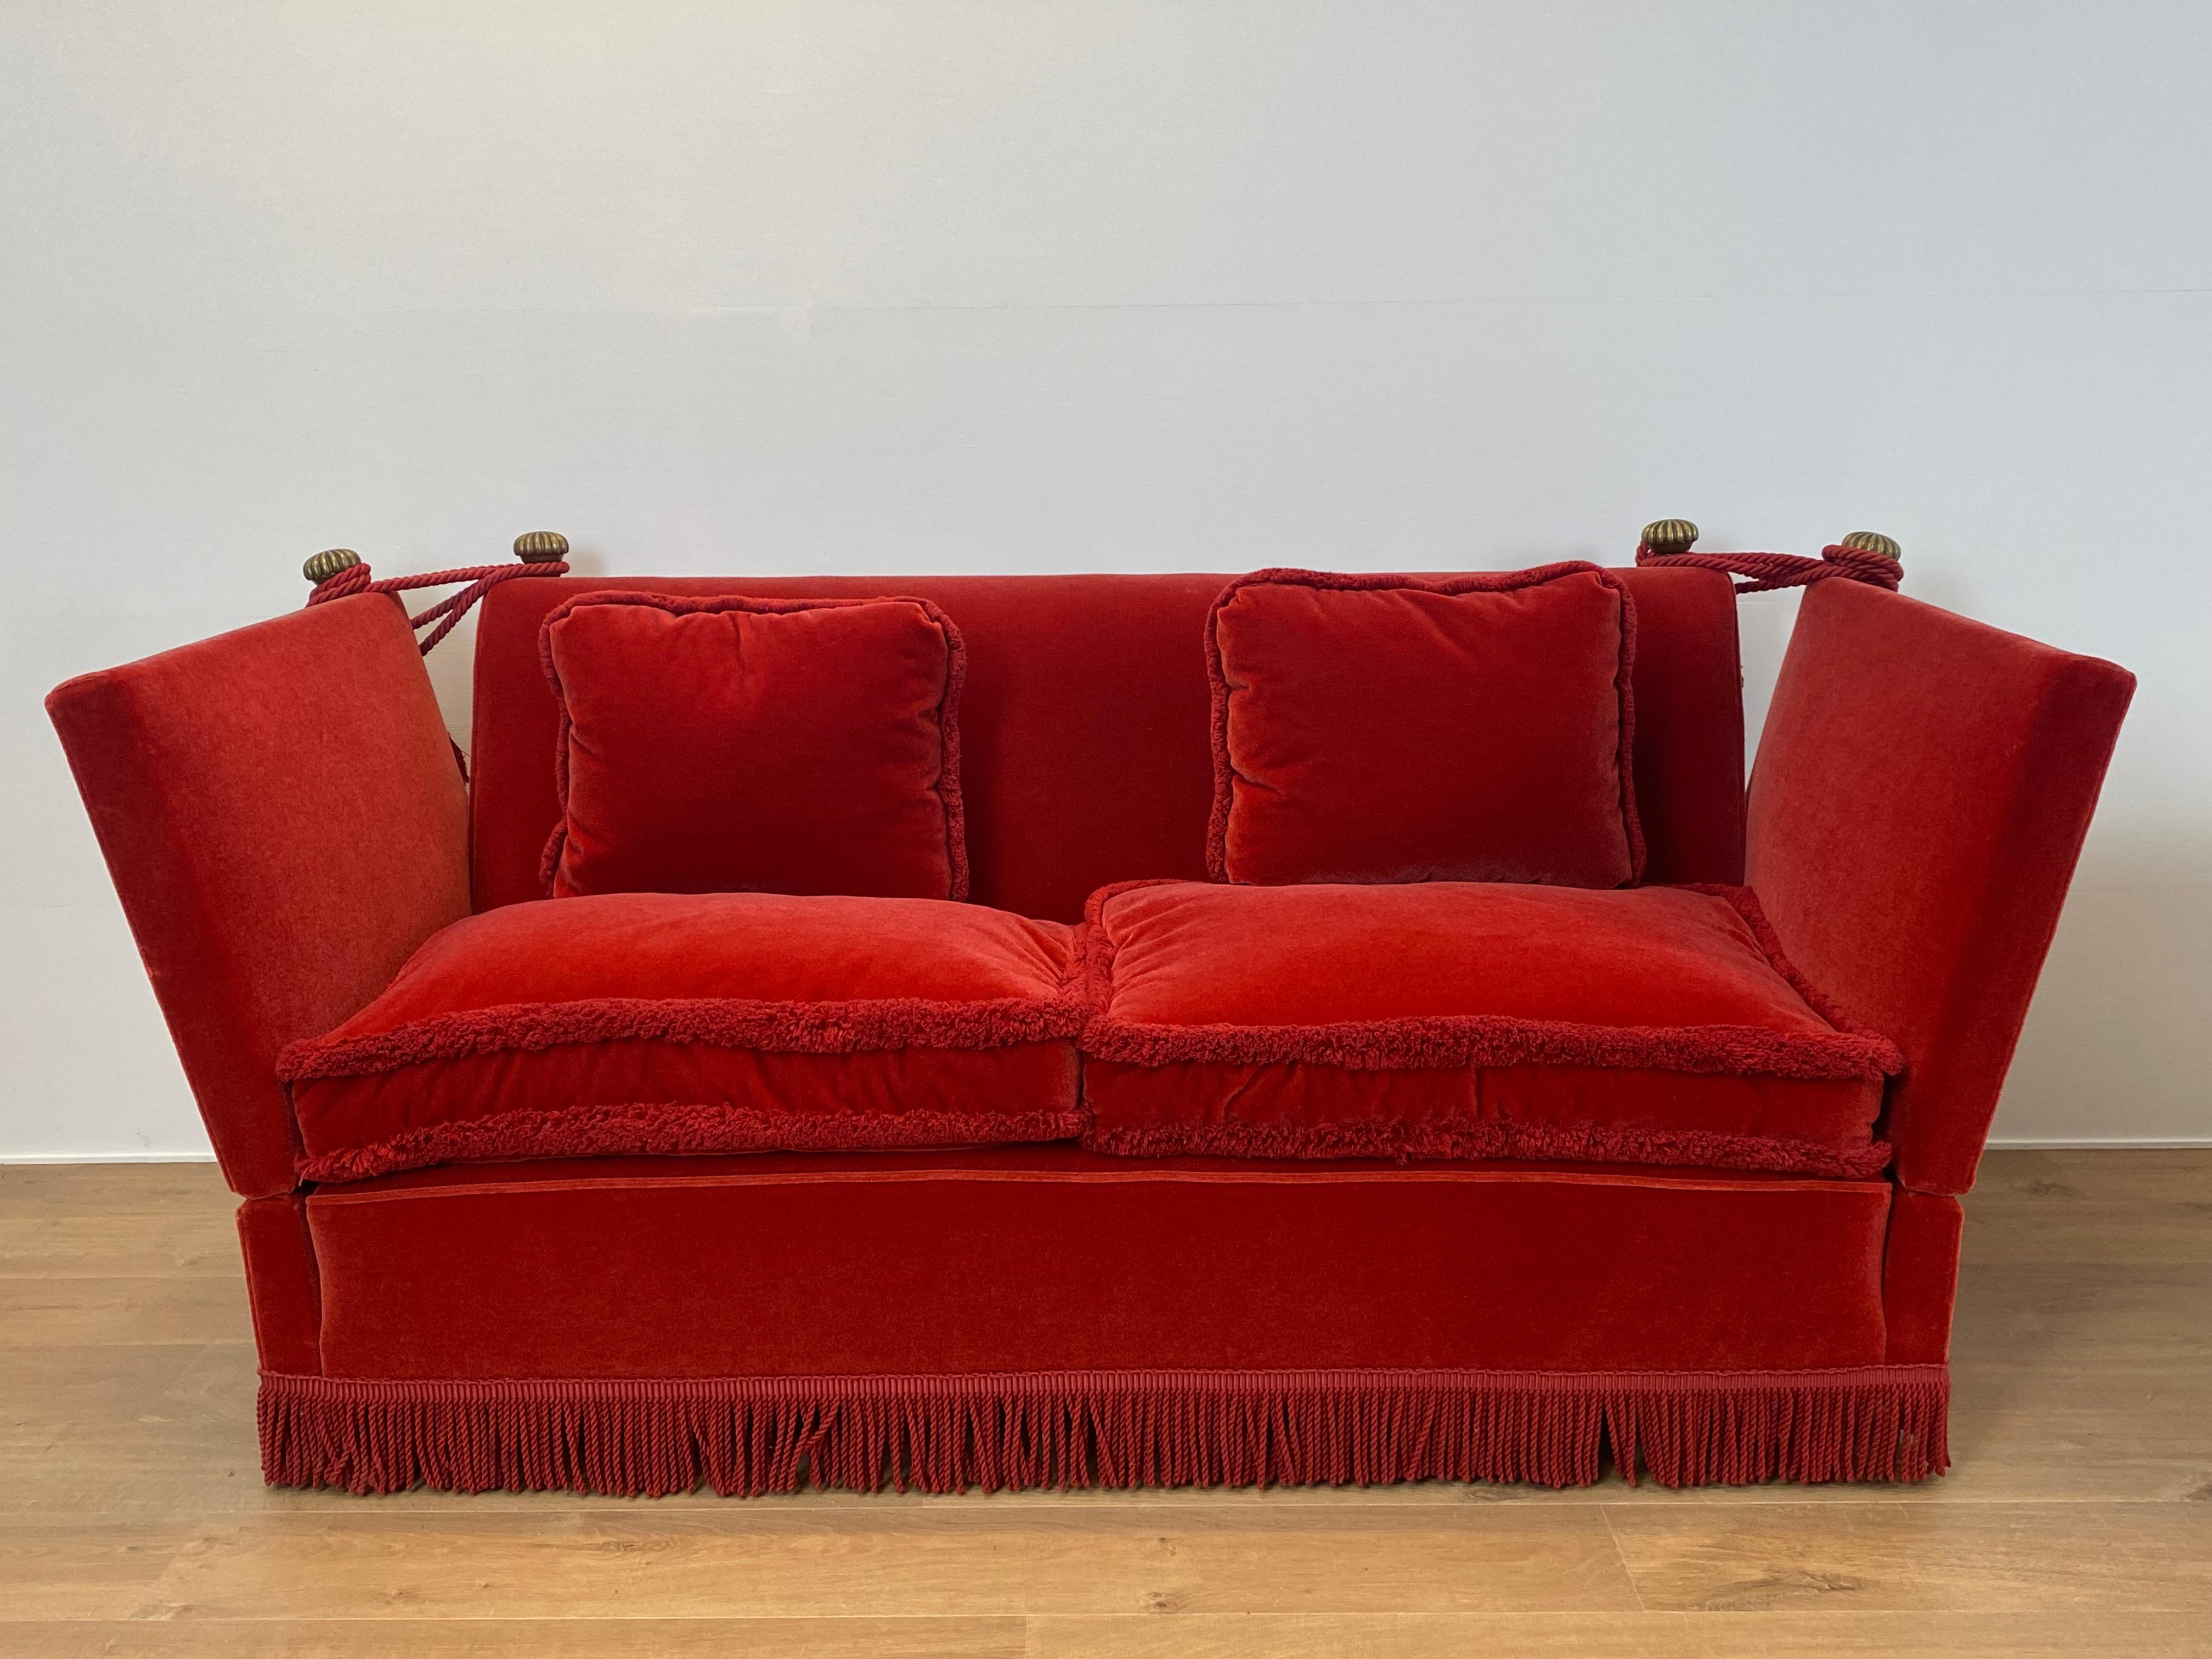 Elegant 20th century knoll style sofa,
nice reupholstery using plush Orange-Red material with elegant fringing, the side panels fold down, comfortable seating,
nice warm color.
 Gives your interior a chic glance.